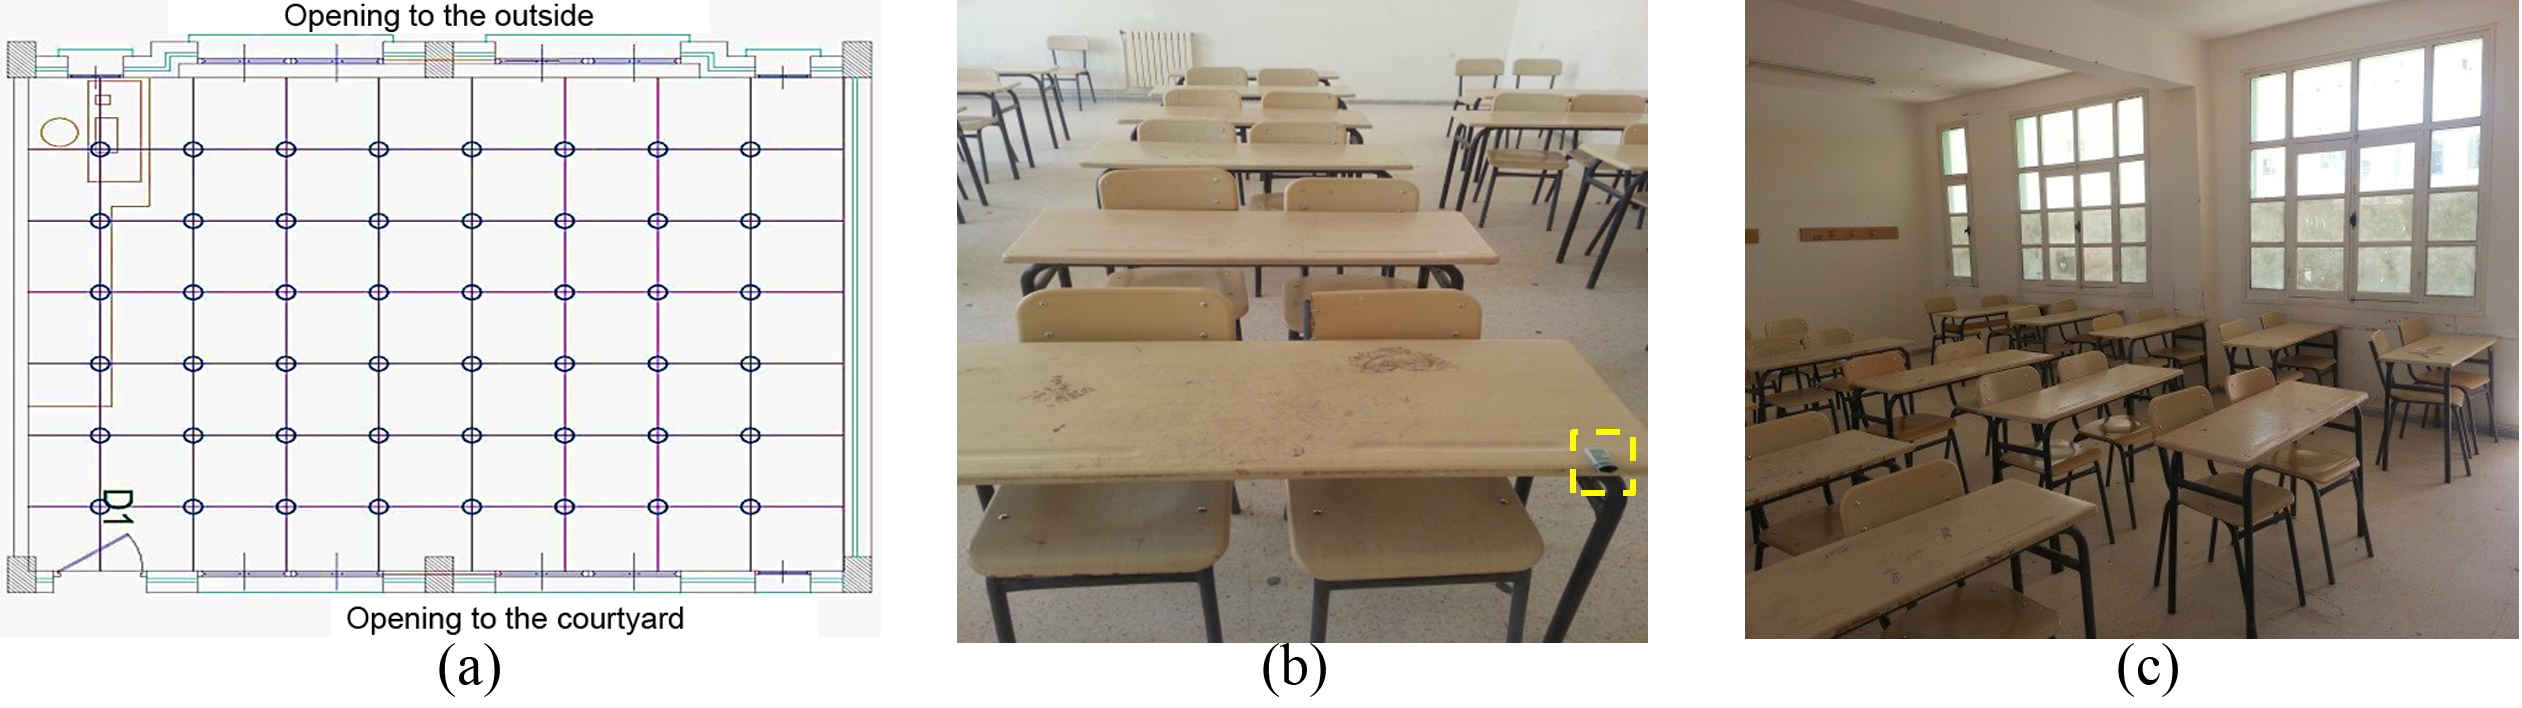 (a) Grids of measurements, (b) arrangement for the experiment within classroom, and (c) visible coating of window.